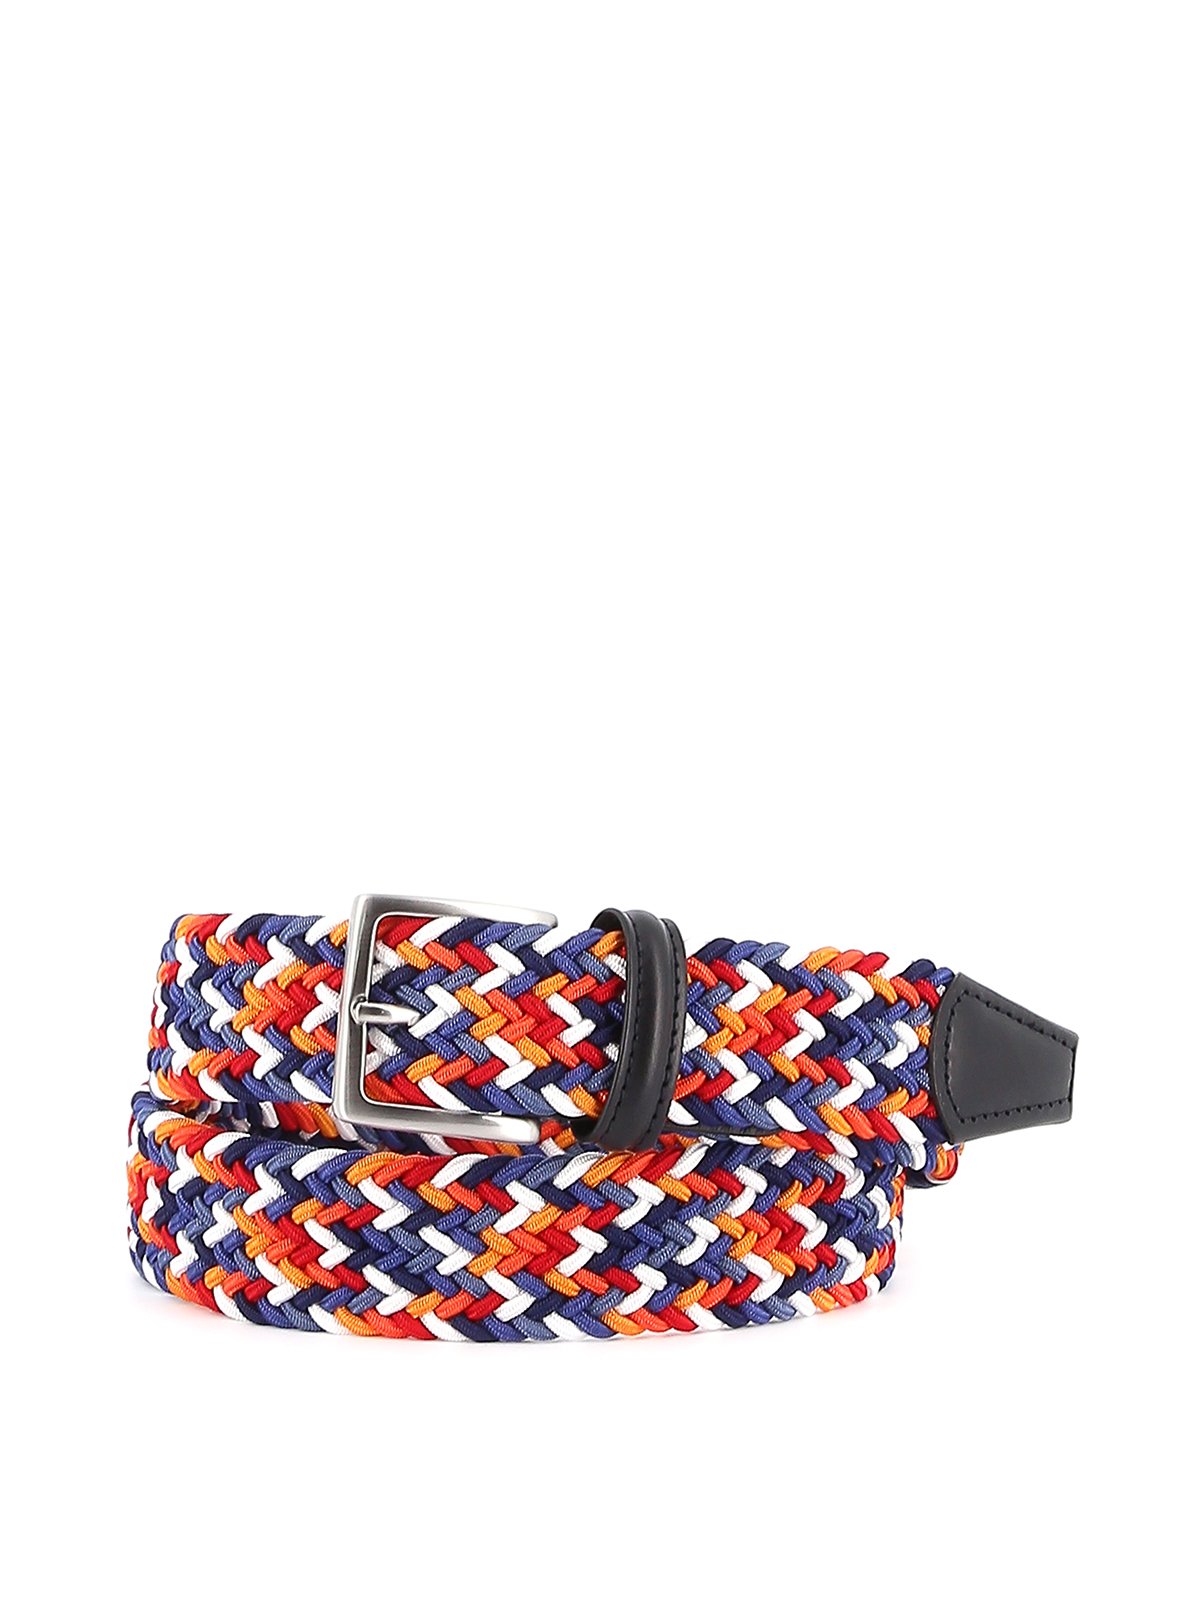 ANDERSON'S BRIGHT STRETCH WOVEN FABRIC BELT